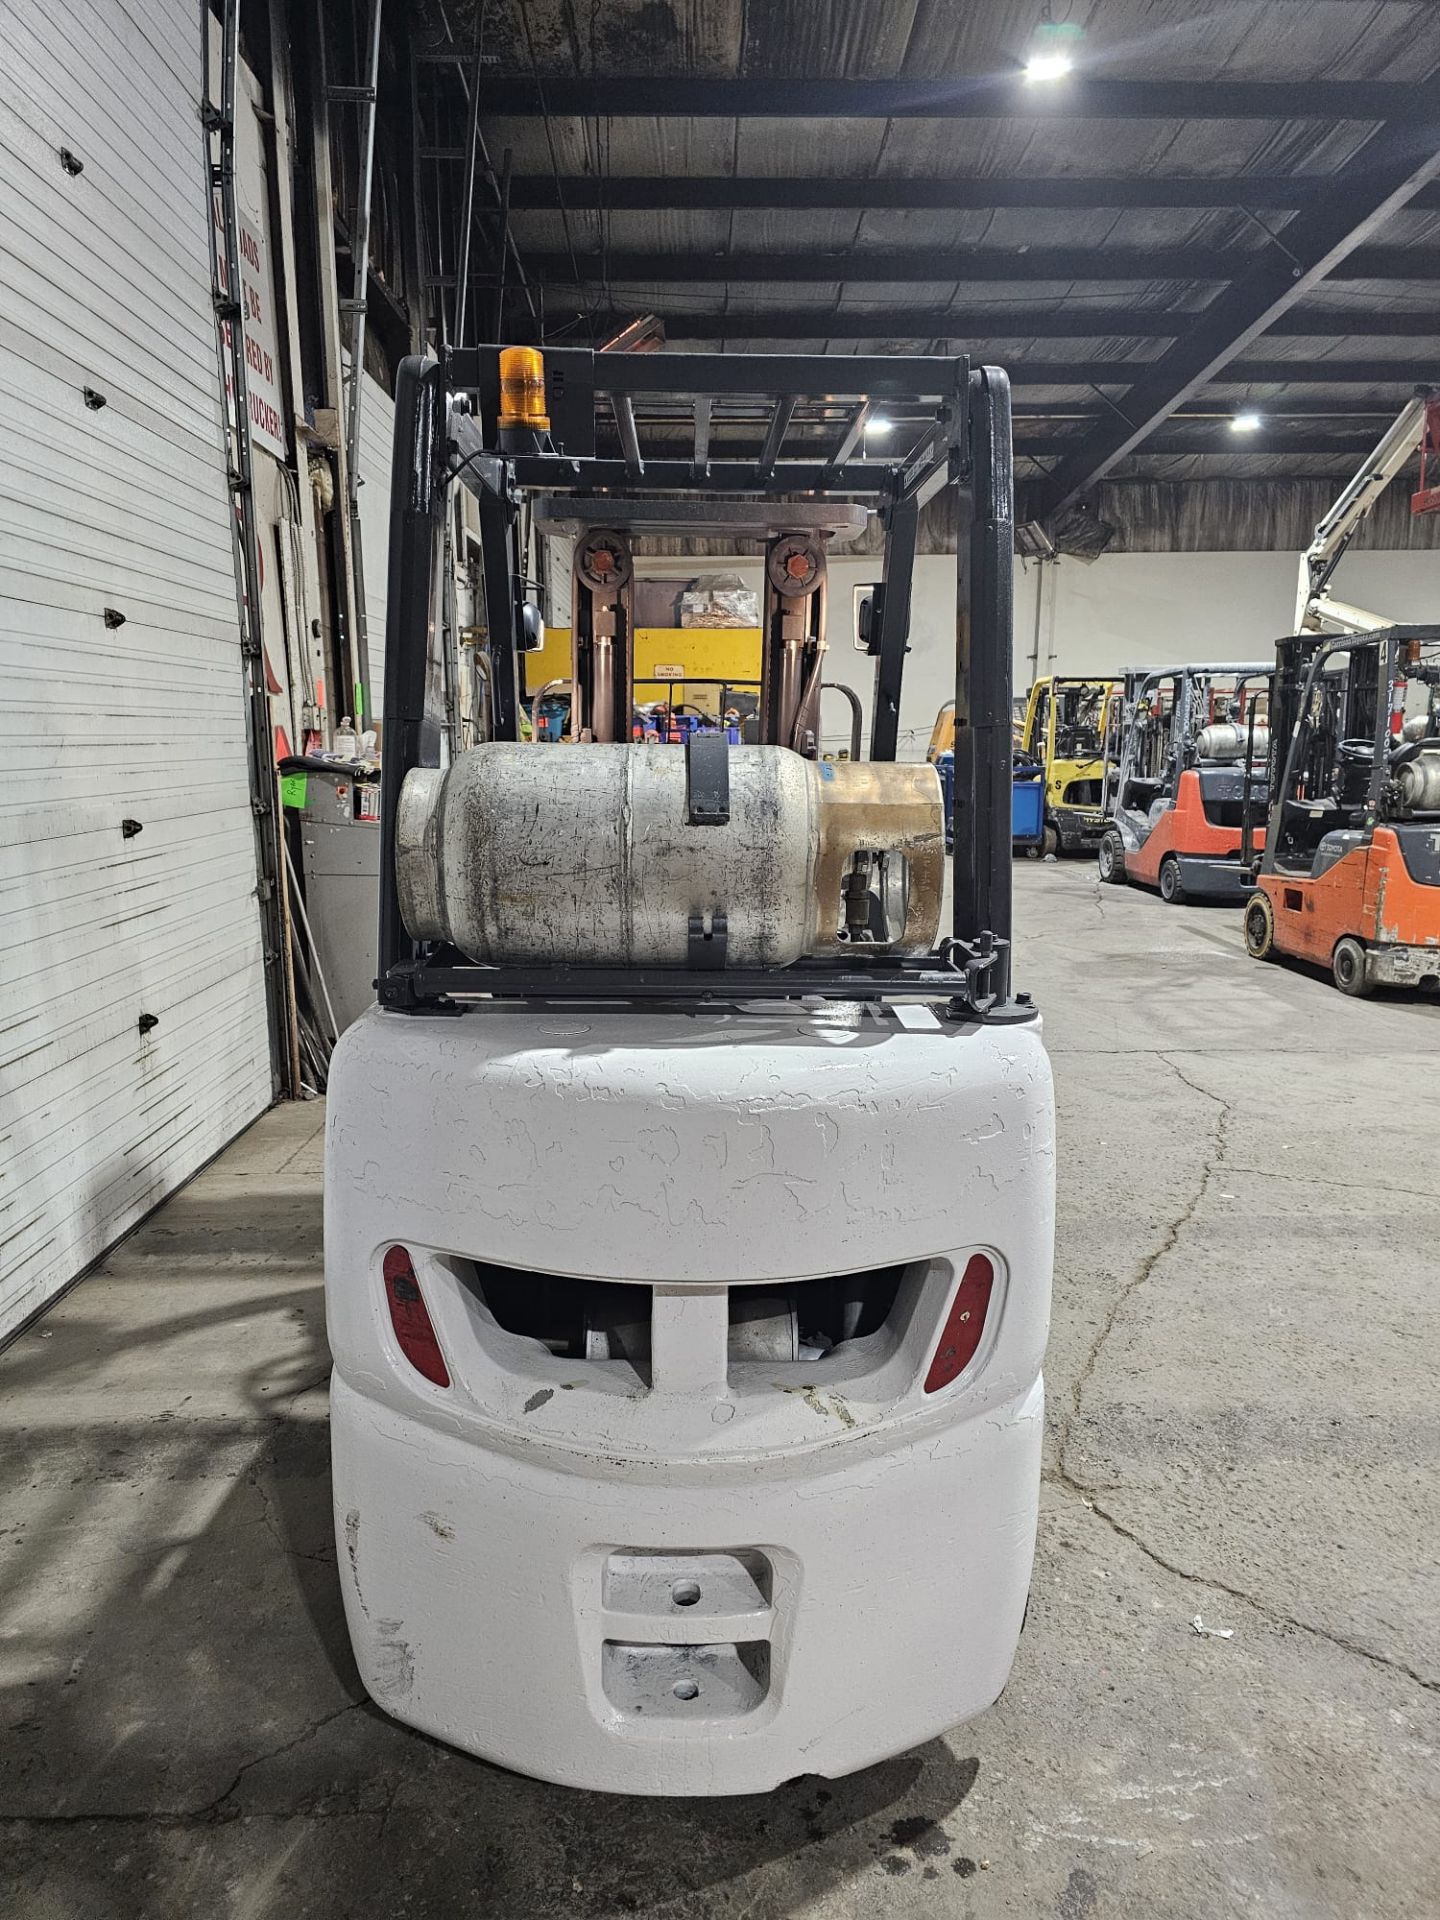 2013 Nissan 5000lbs Capacity LPG (Propane) Forklift 3-STAGE MAST with sideshift (no propane tank - Image 4 of 5